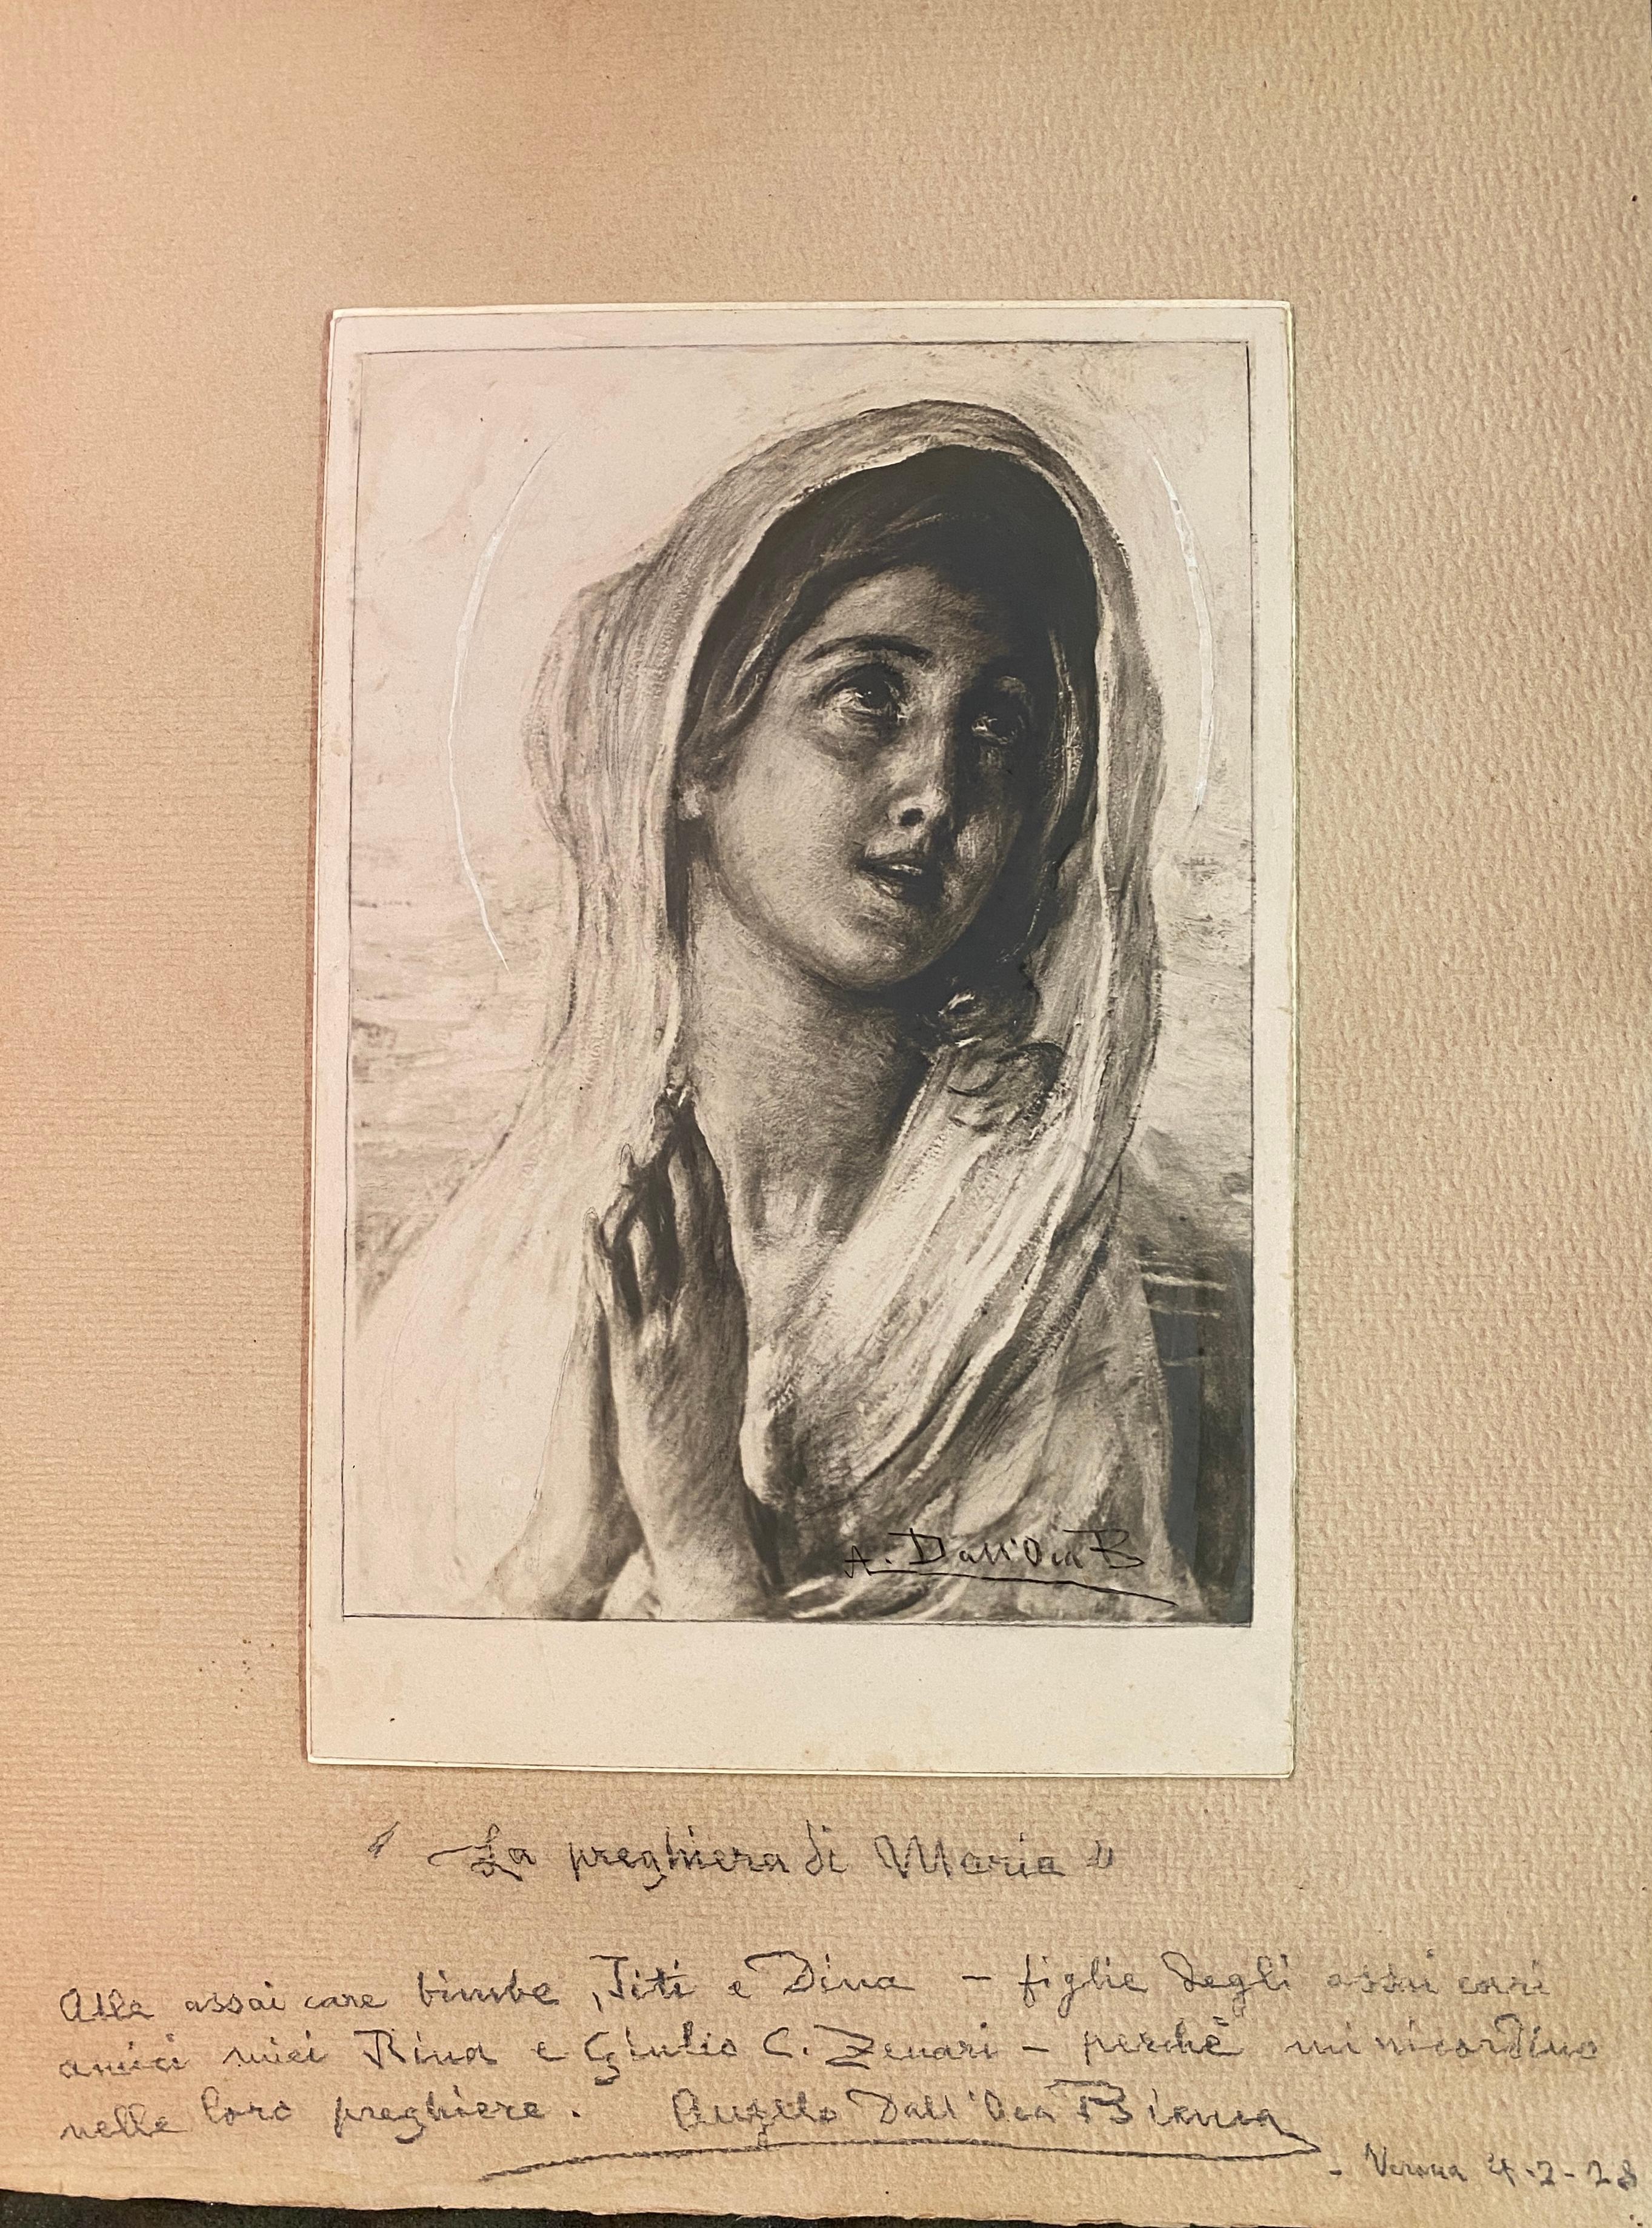 Positive photographic print with white lead highlights and charcoal trim of a painting depicting the prayer of Mary, both made by Angelo Dall'Oca Bianca.

The photograph has the artist's signature at lower right in charcoal and measures 30 x 20 cm.